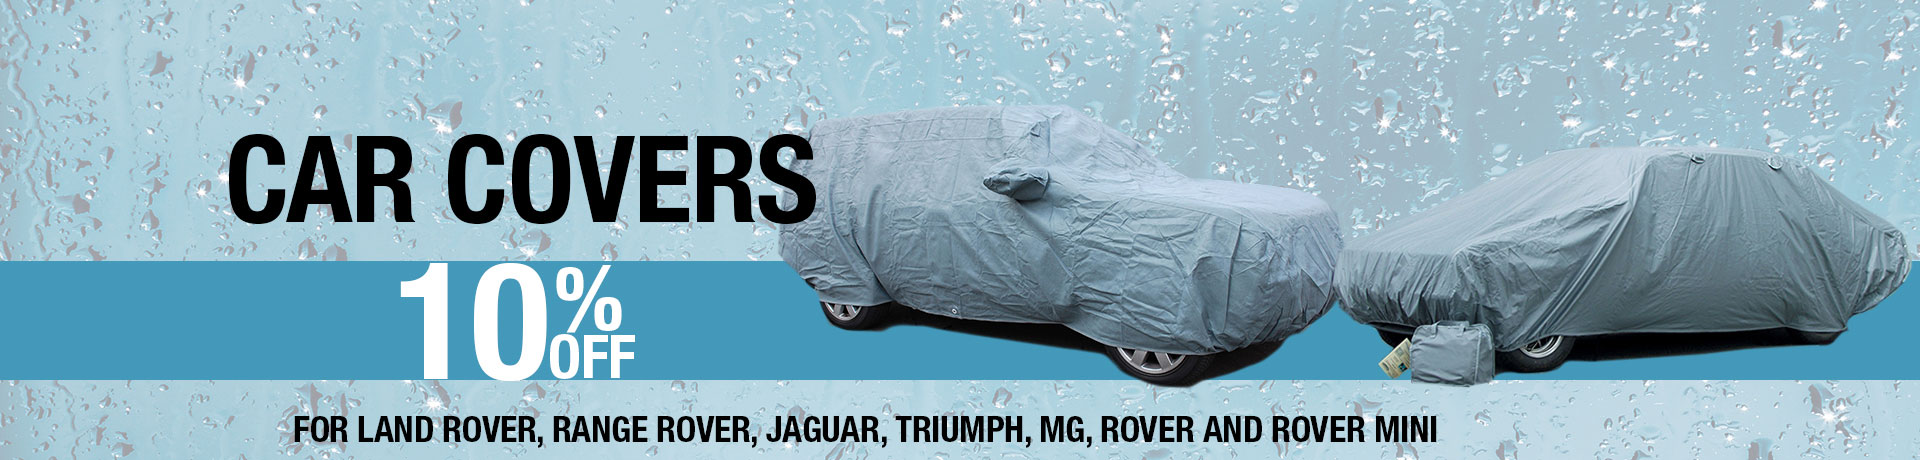 Car Covers Sale